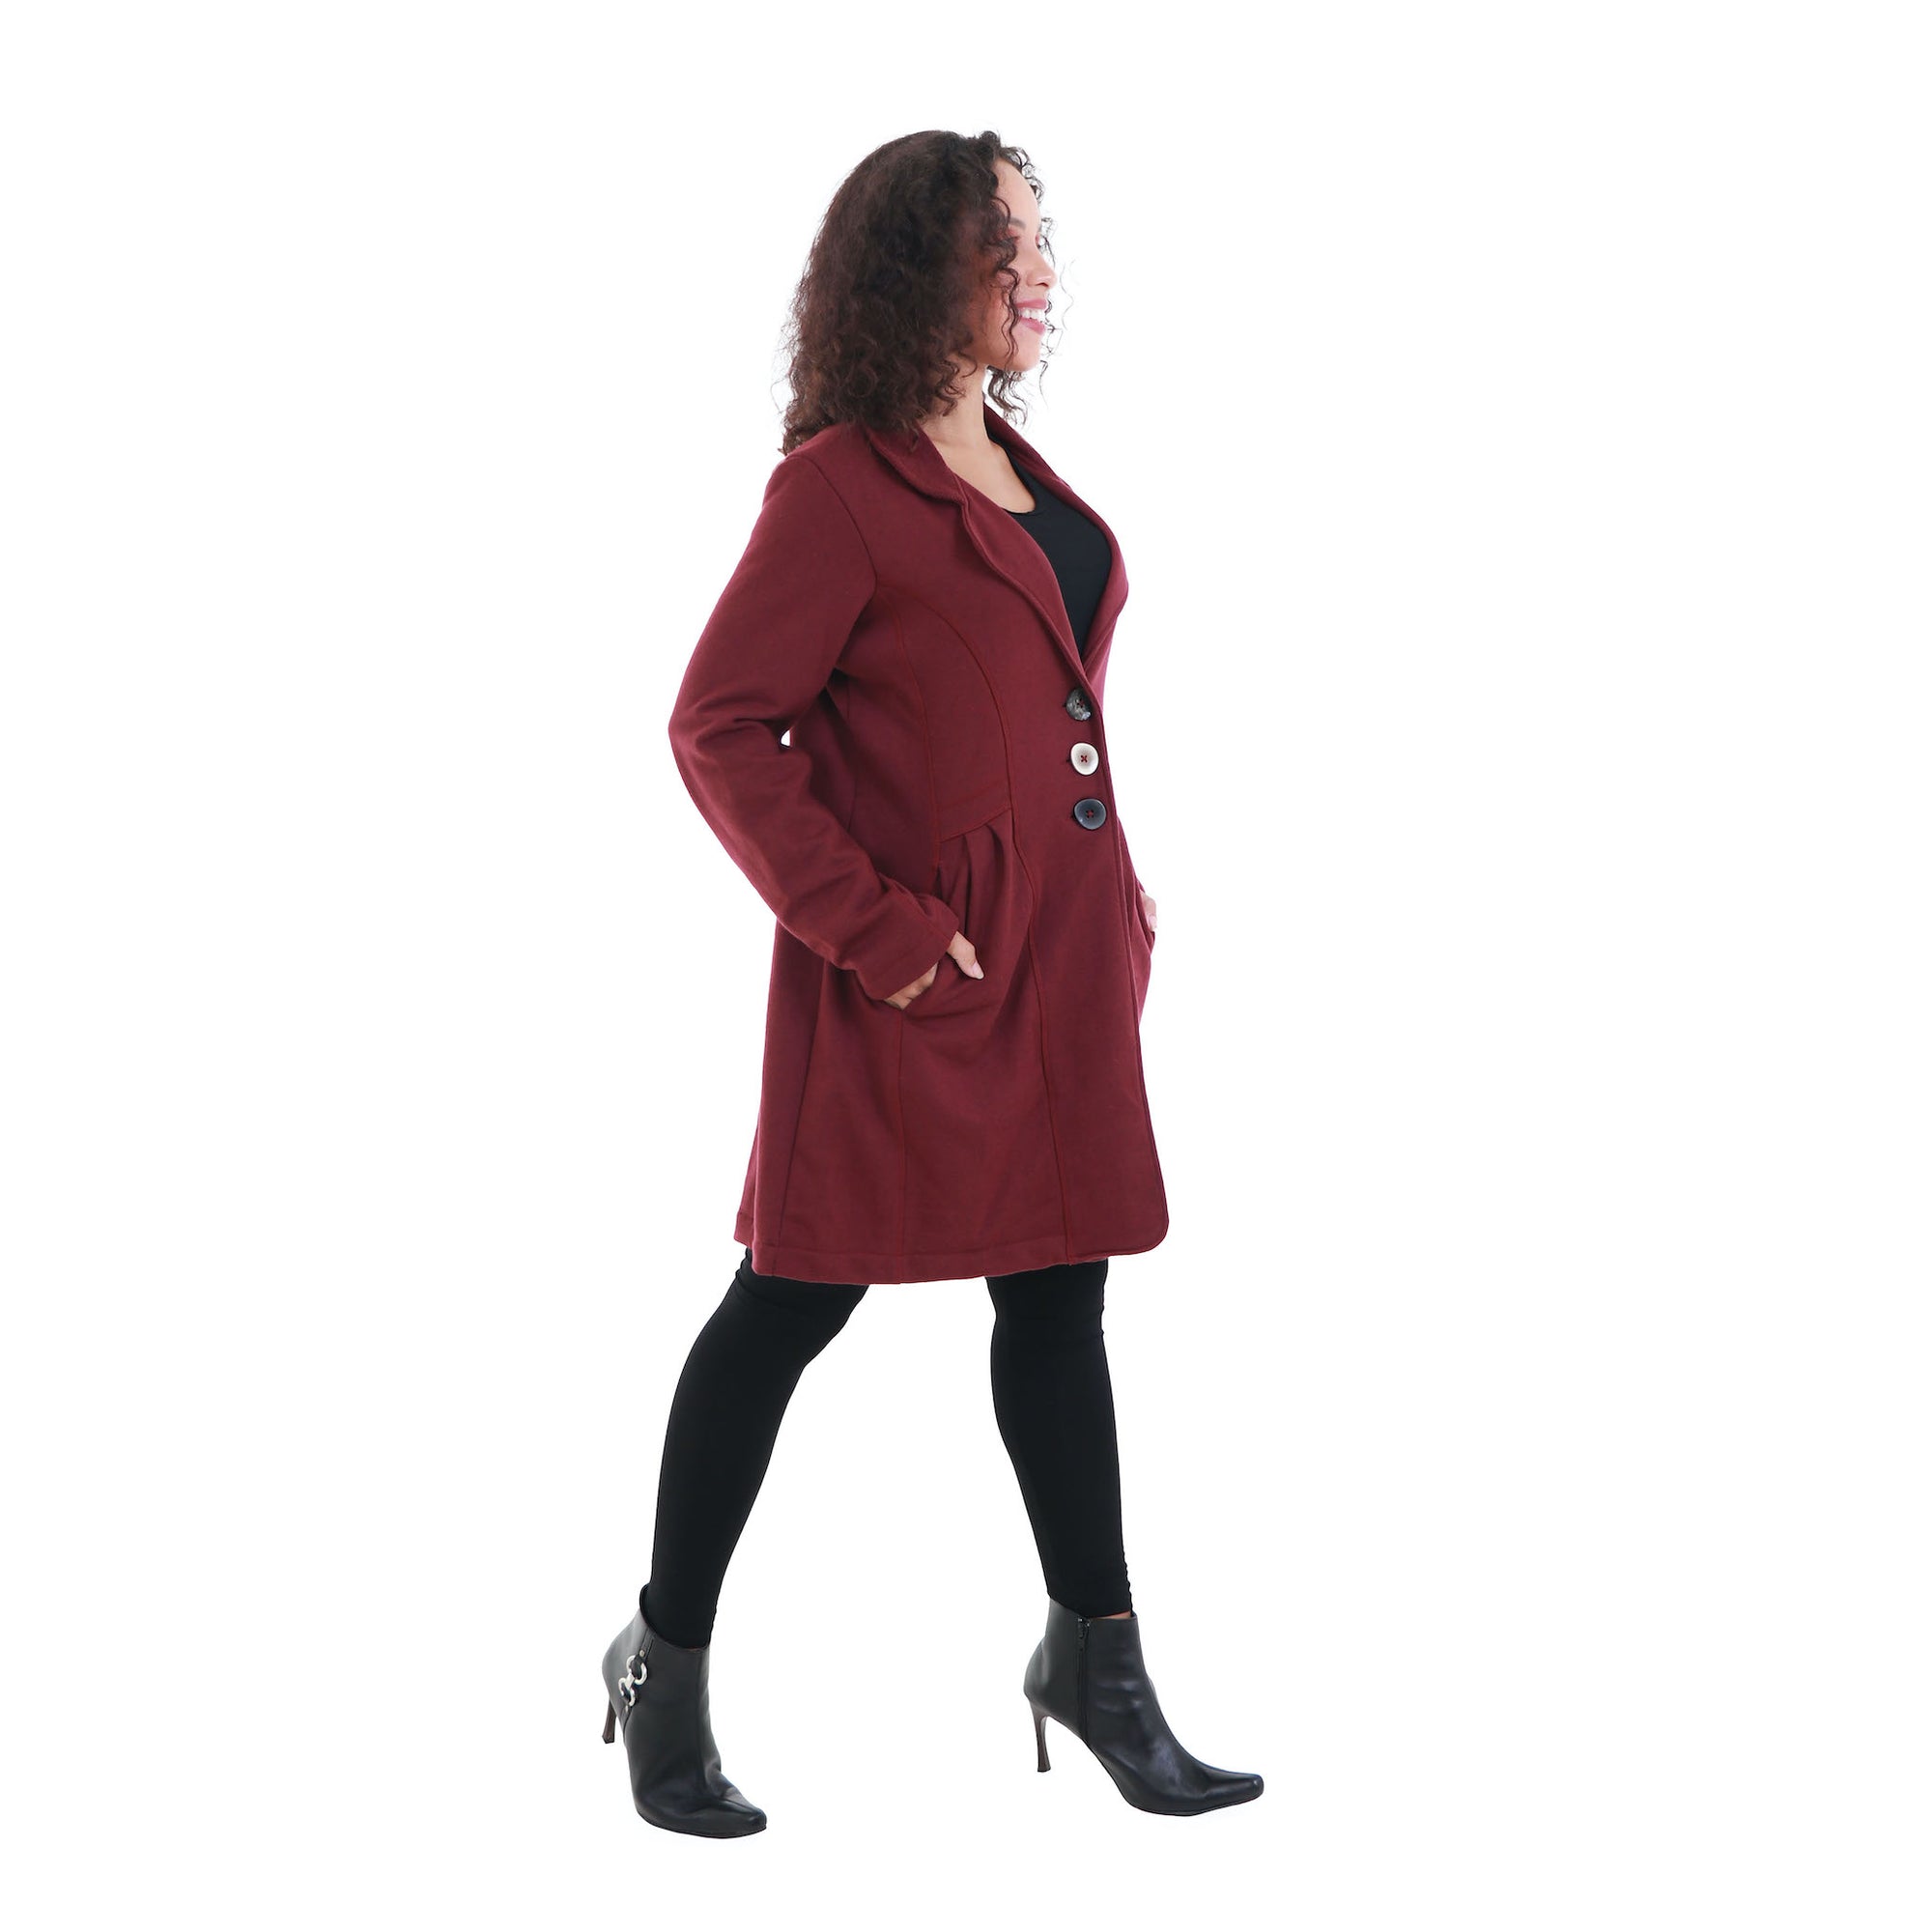 fair trade women's spring coats | fits sizes xs to xl  - free shipping | stylish handmade outerwear for women | stay warm in style